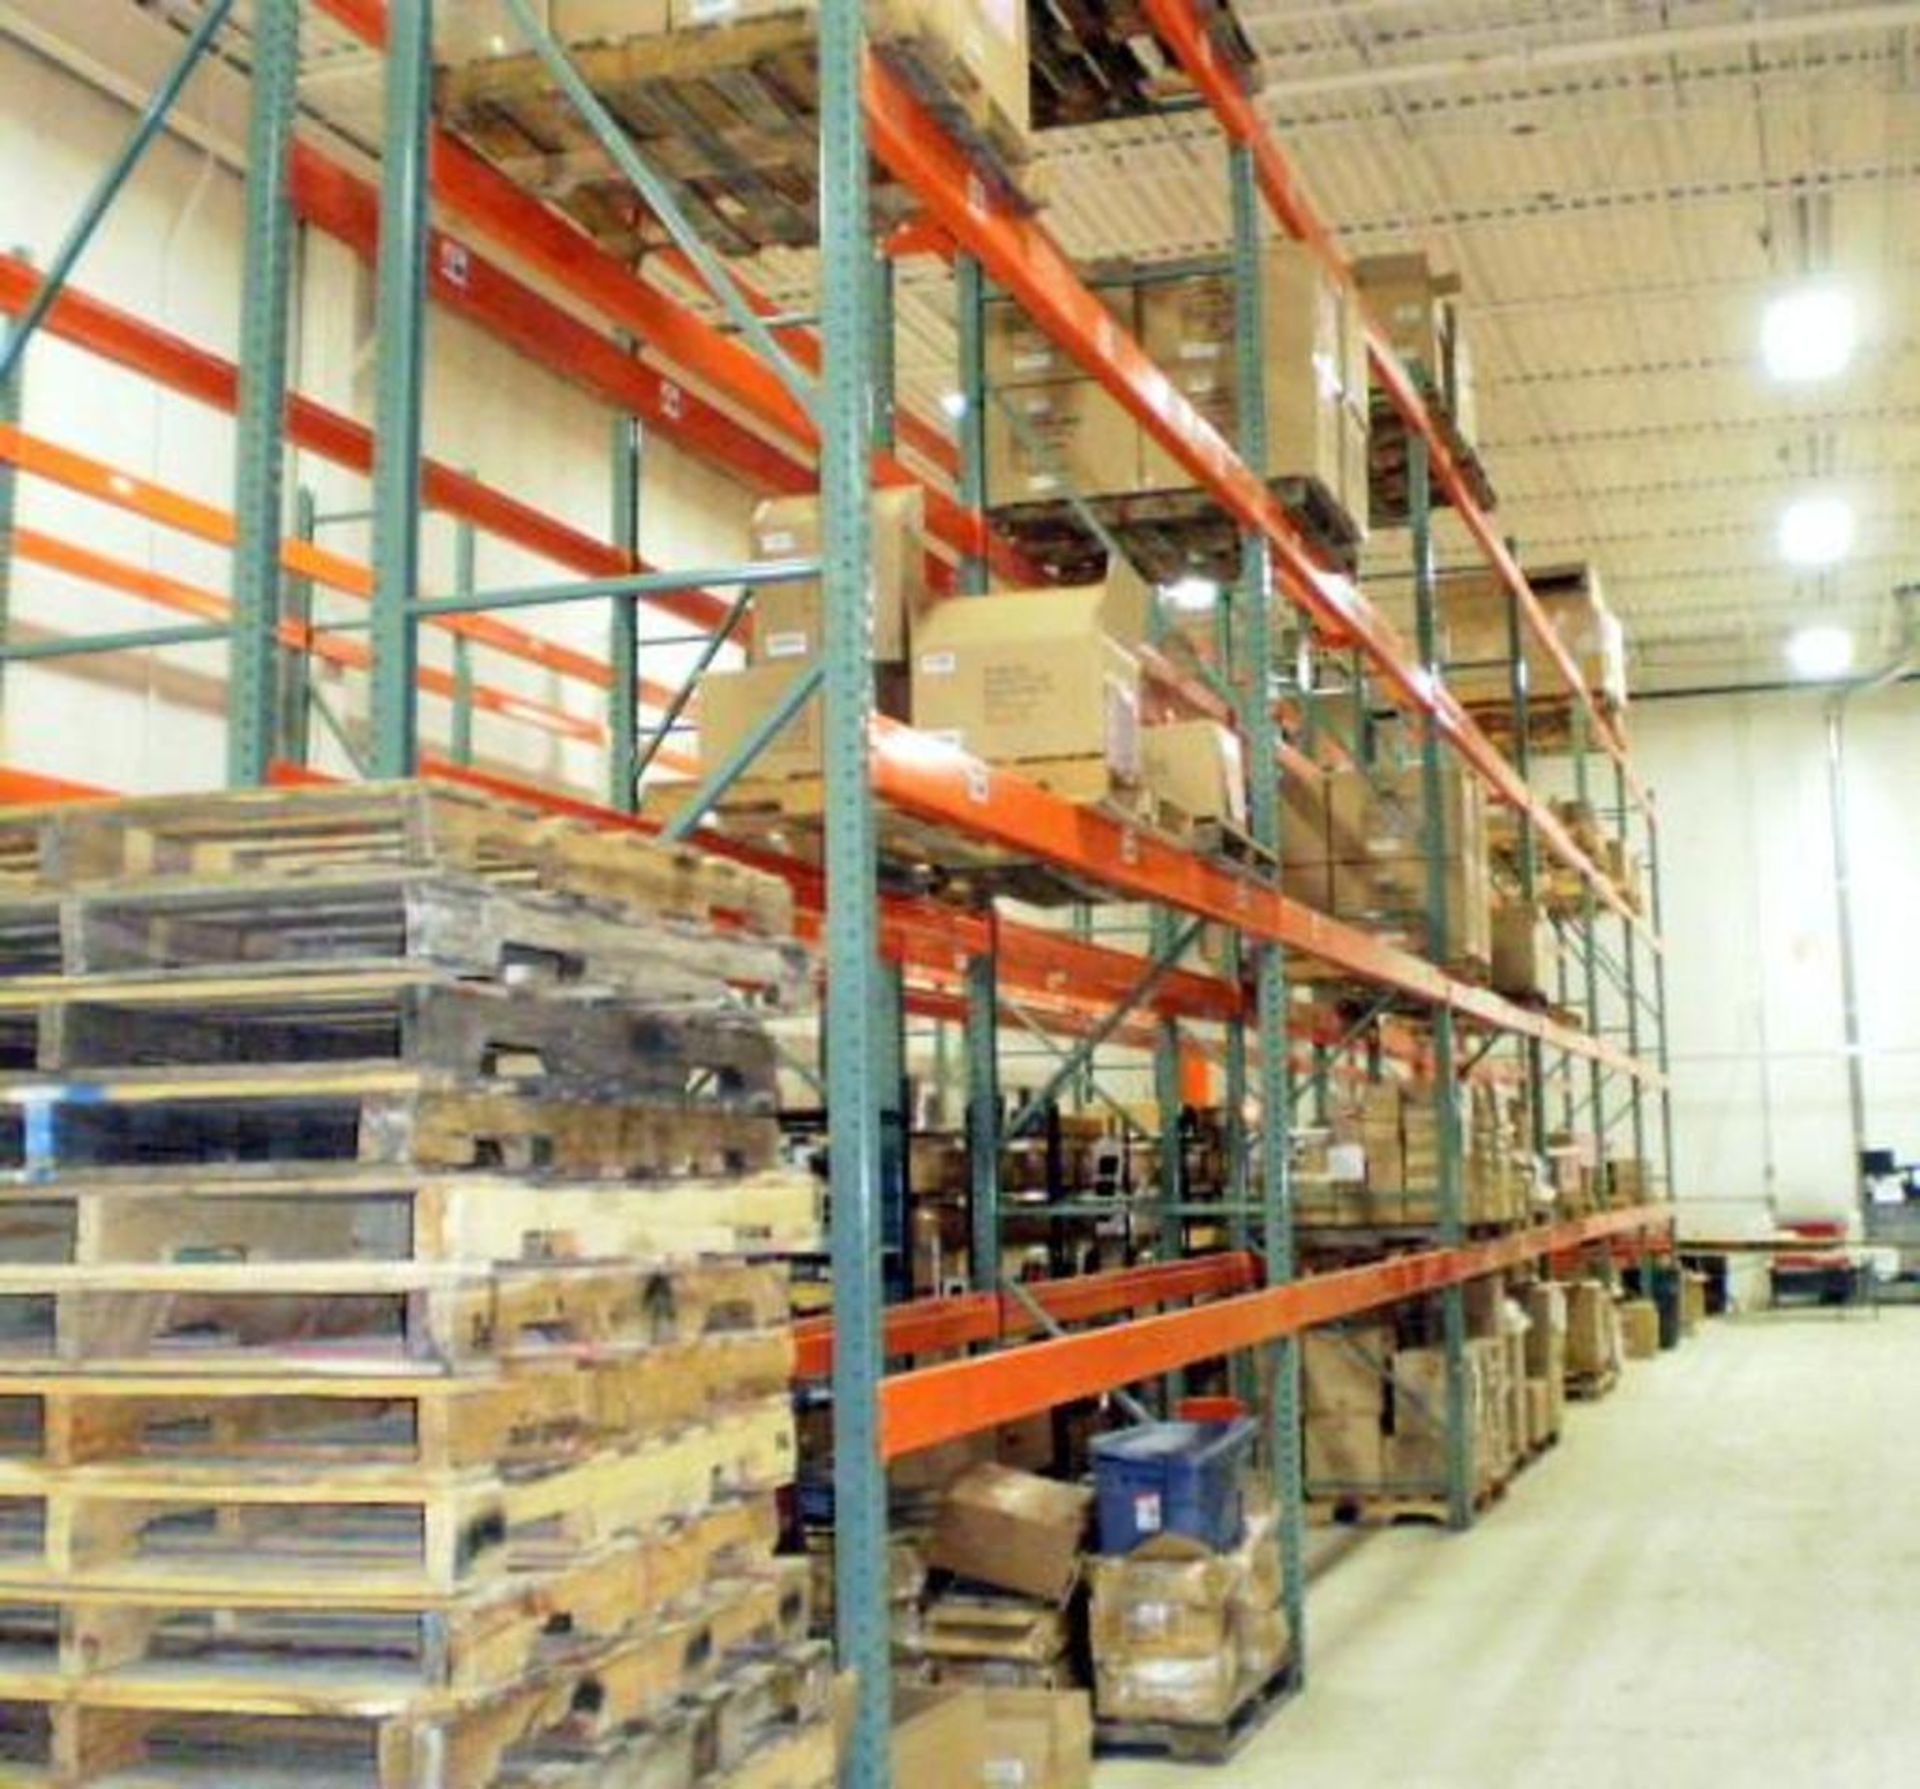 Pallet Rack (Double Row)-18'H X 12'W X 42"D, 14 Uprights, 84 Beams; Racks Only No Contents.